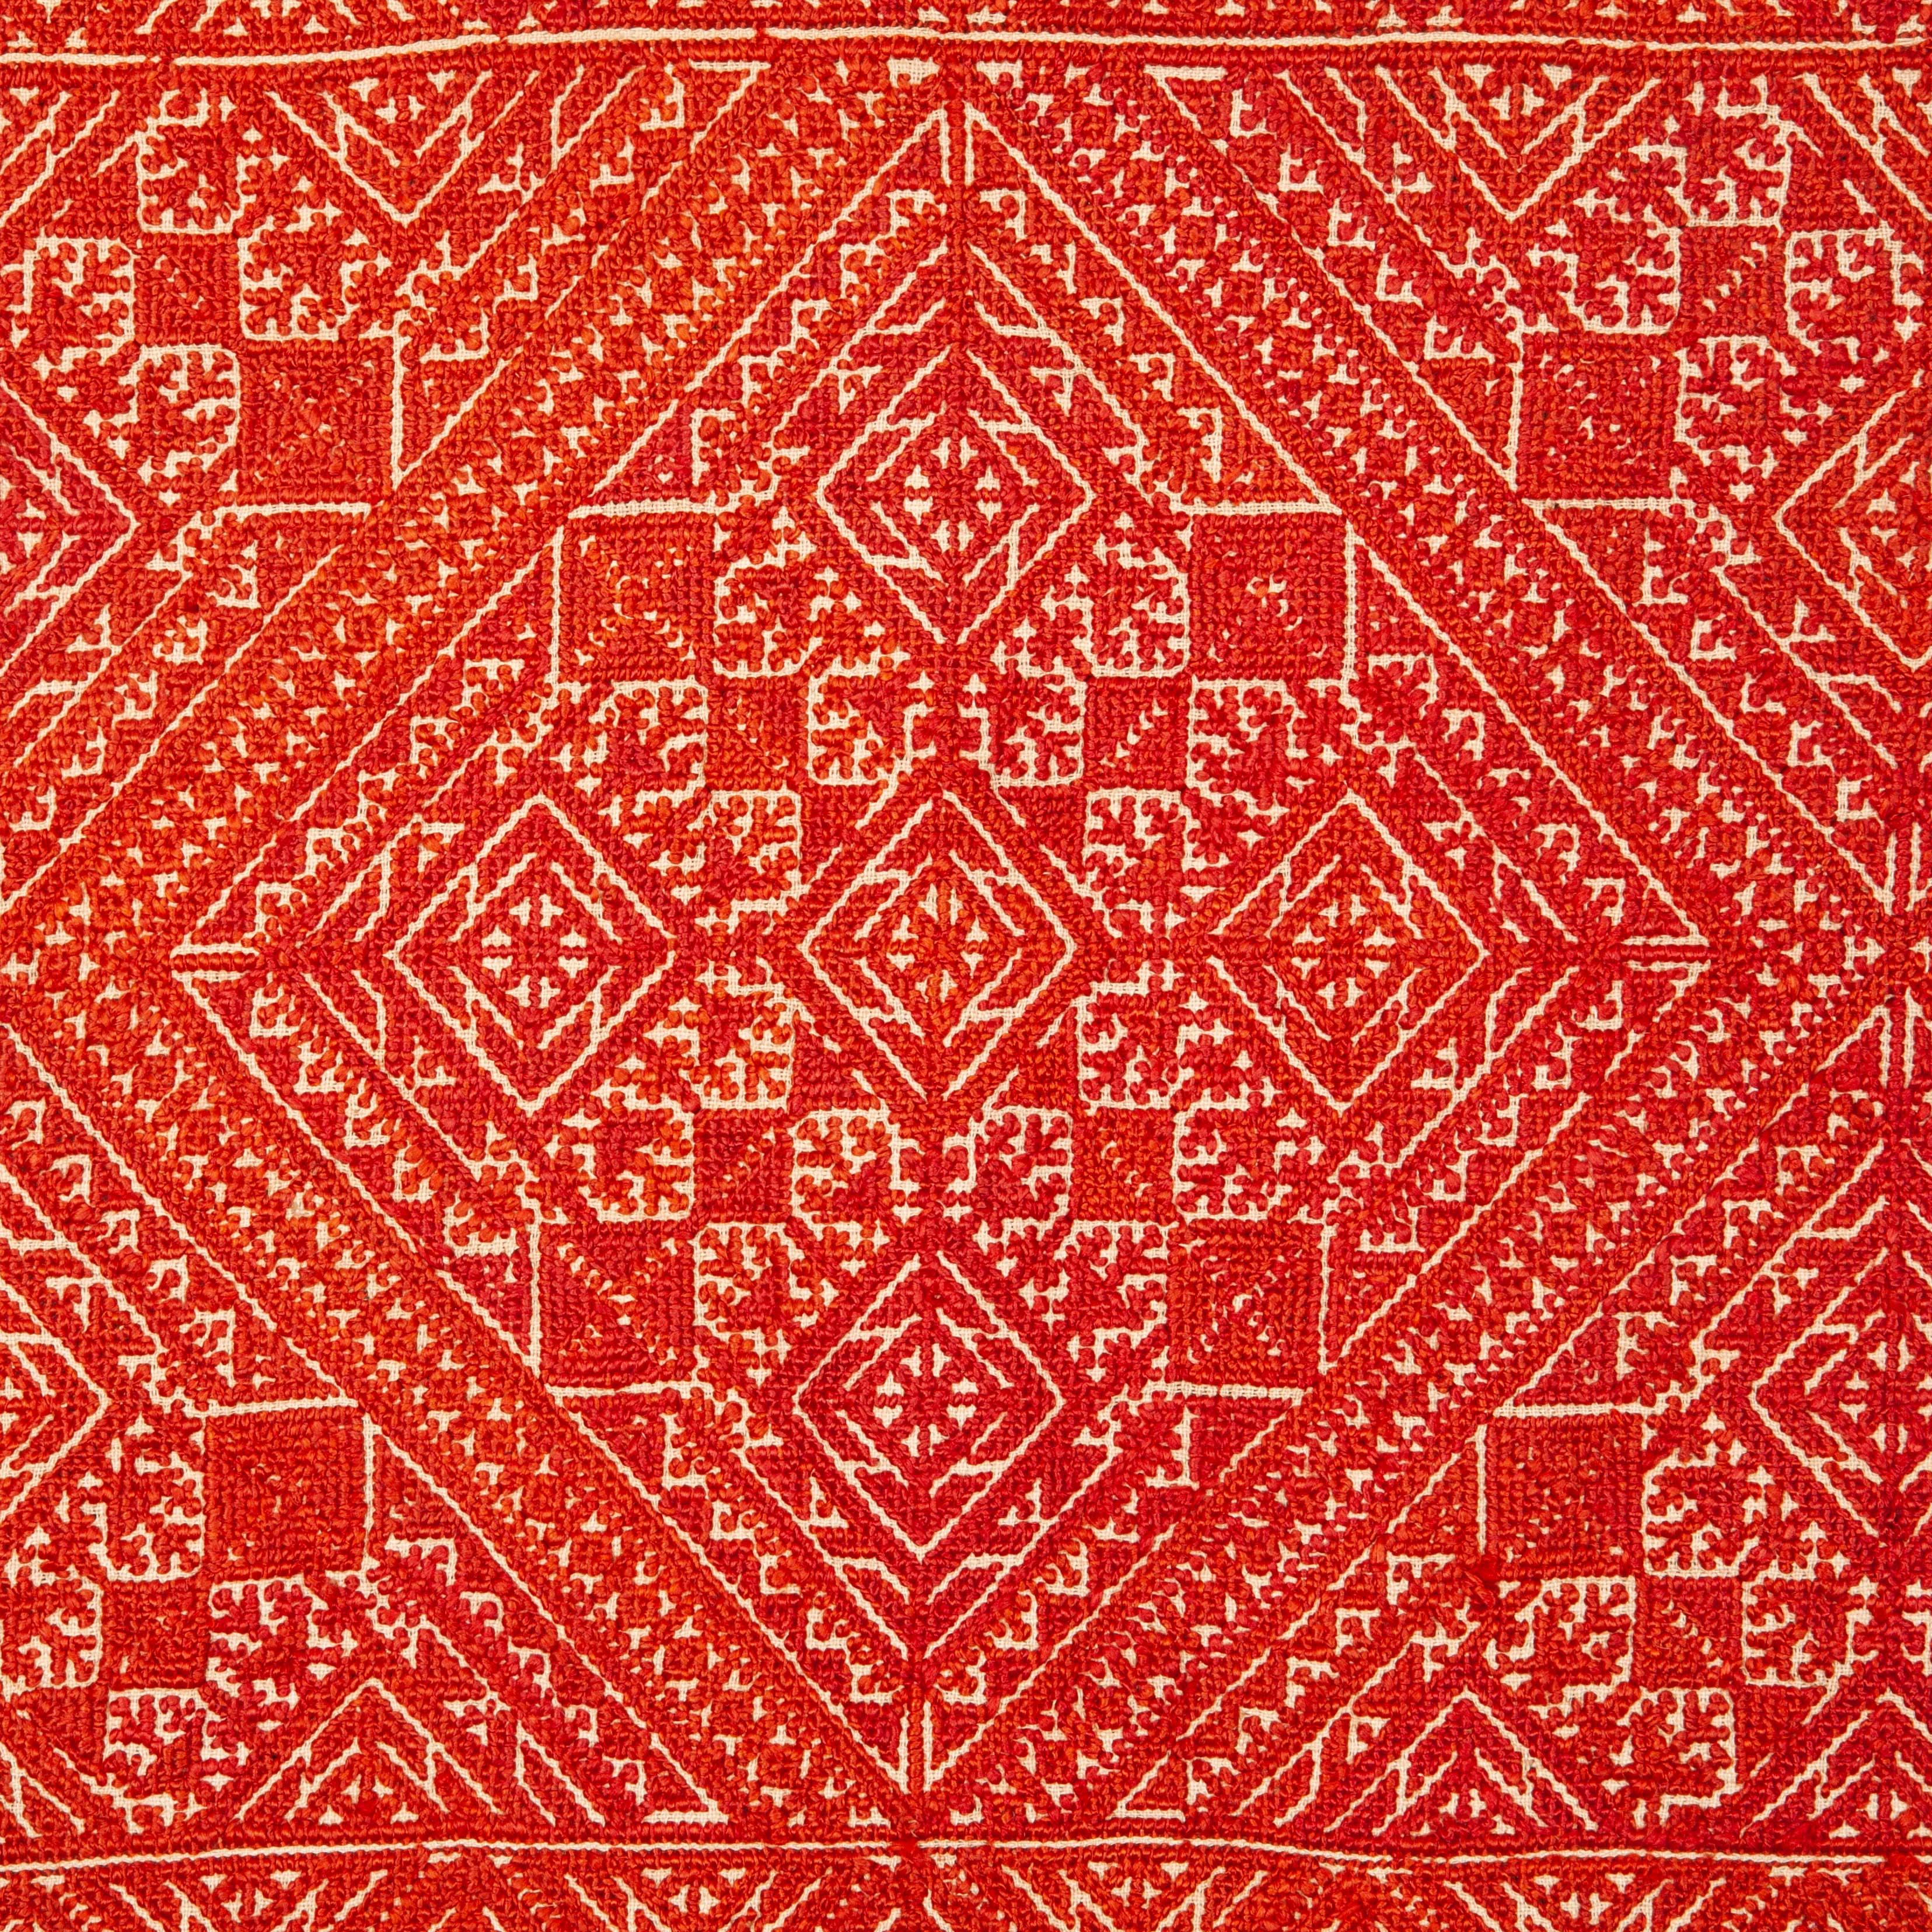 Moroccan Antique Fez Embroidery from Morocco, 1900s